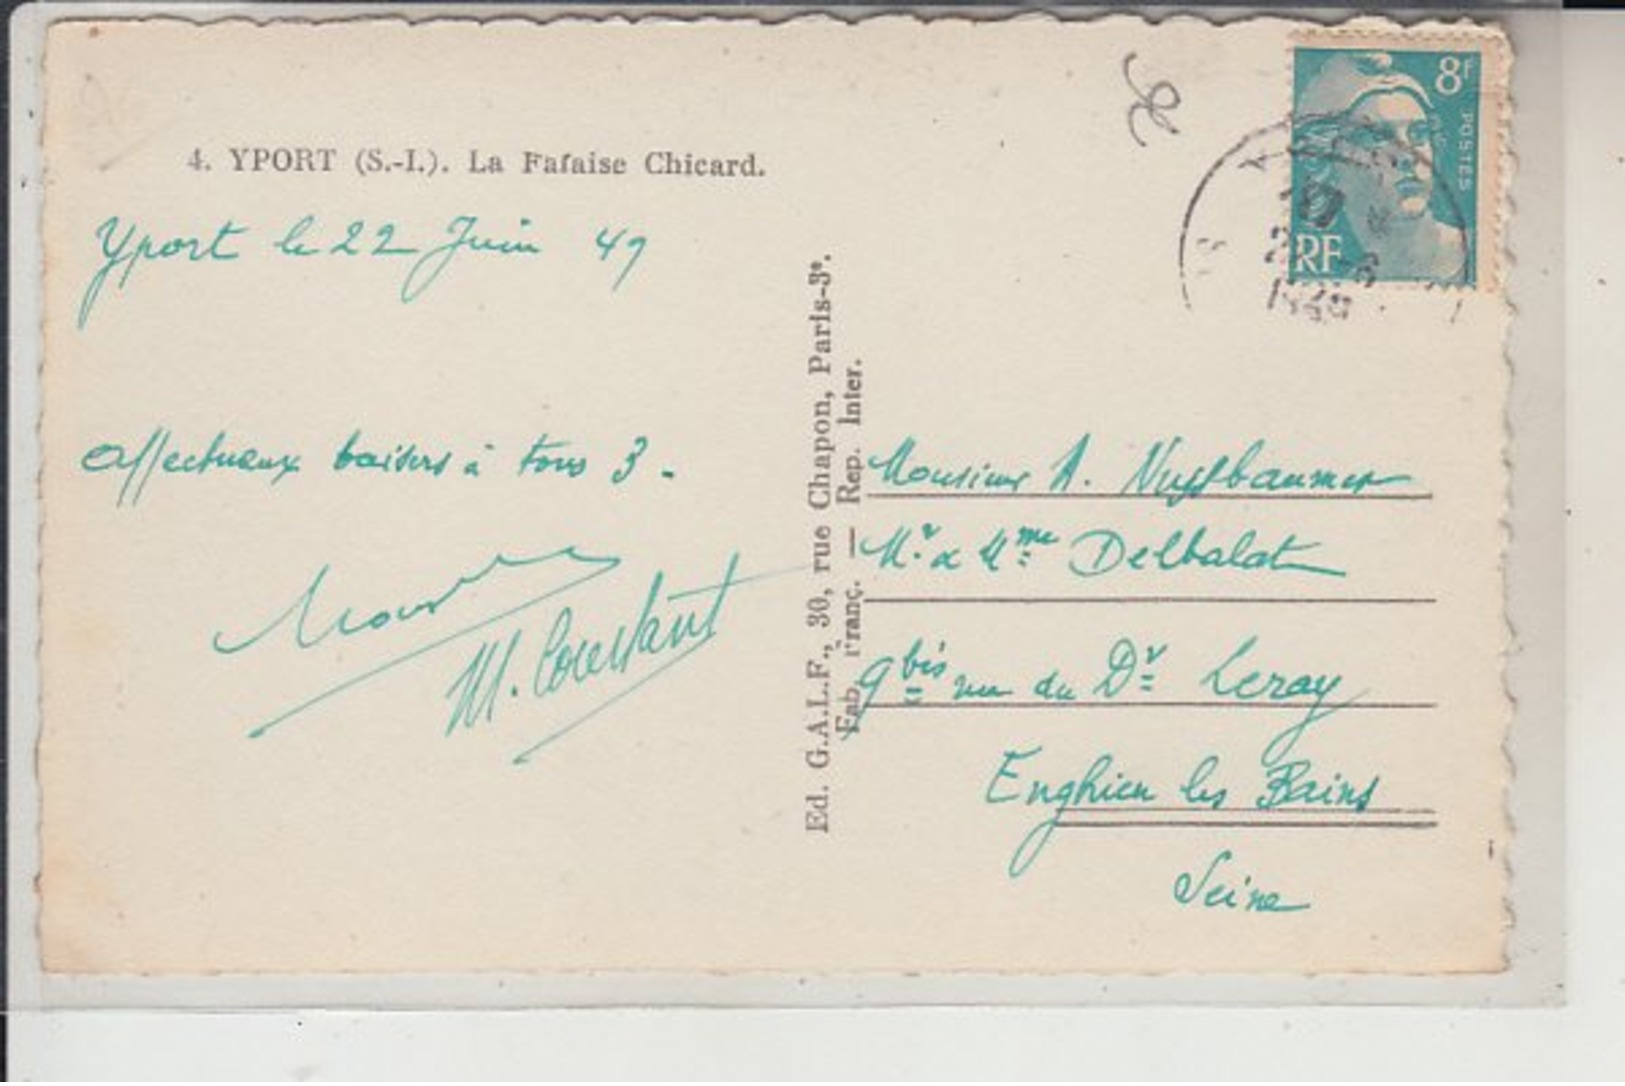 76  - YPORT -Falaise Chicard..1949 - Yport